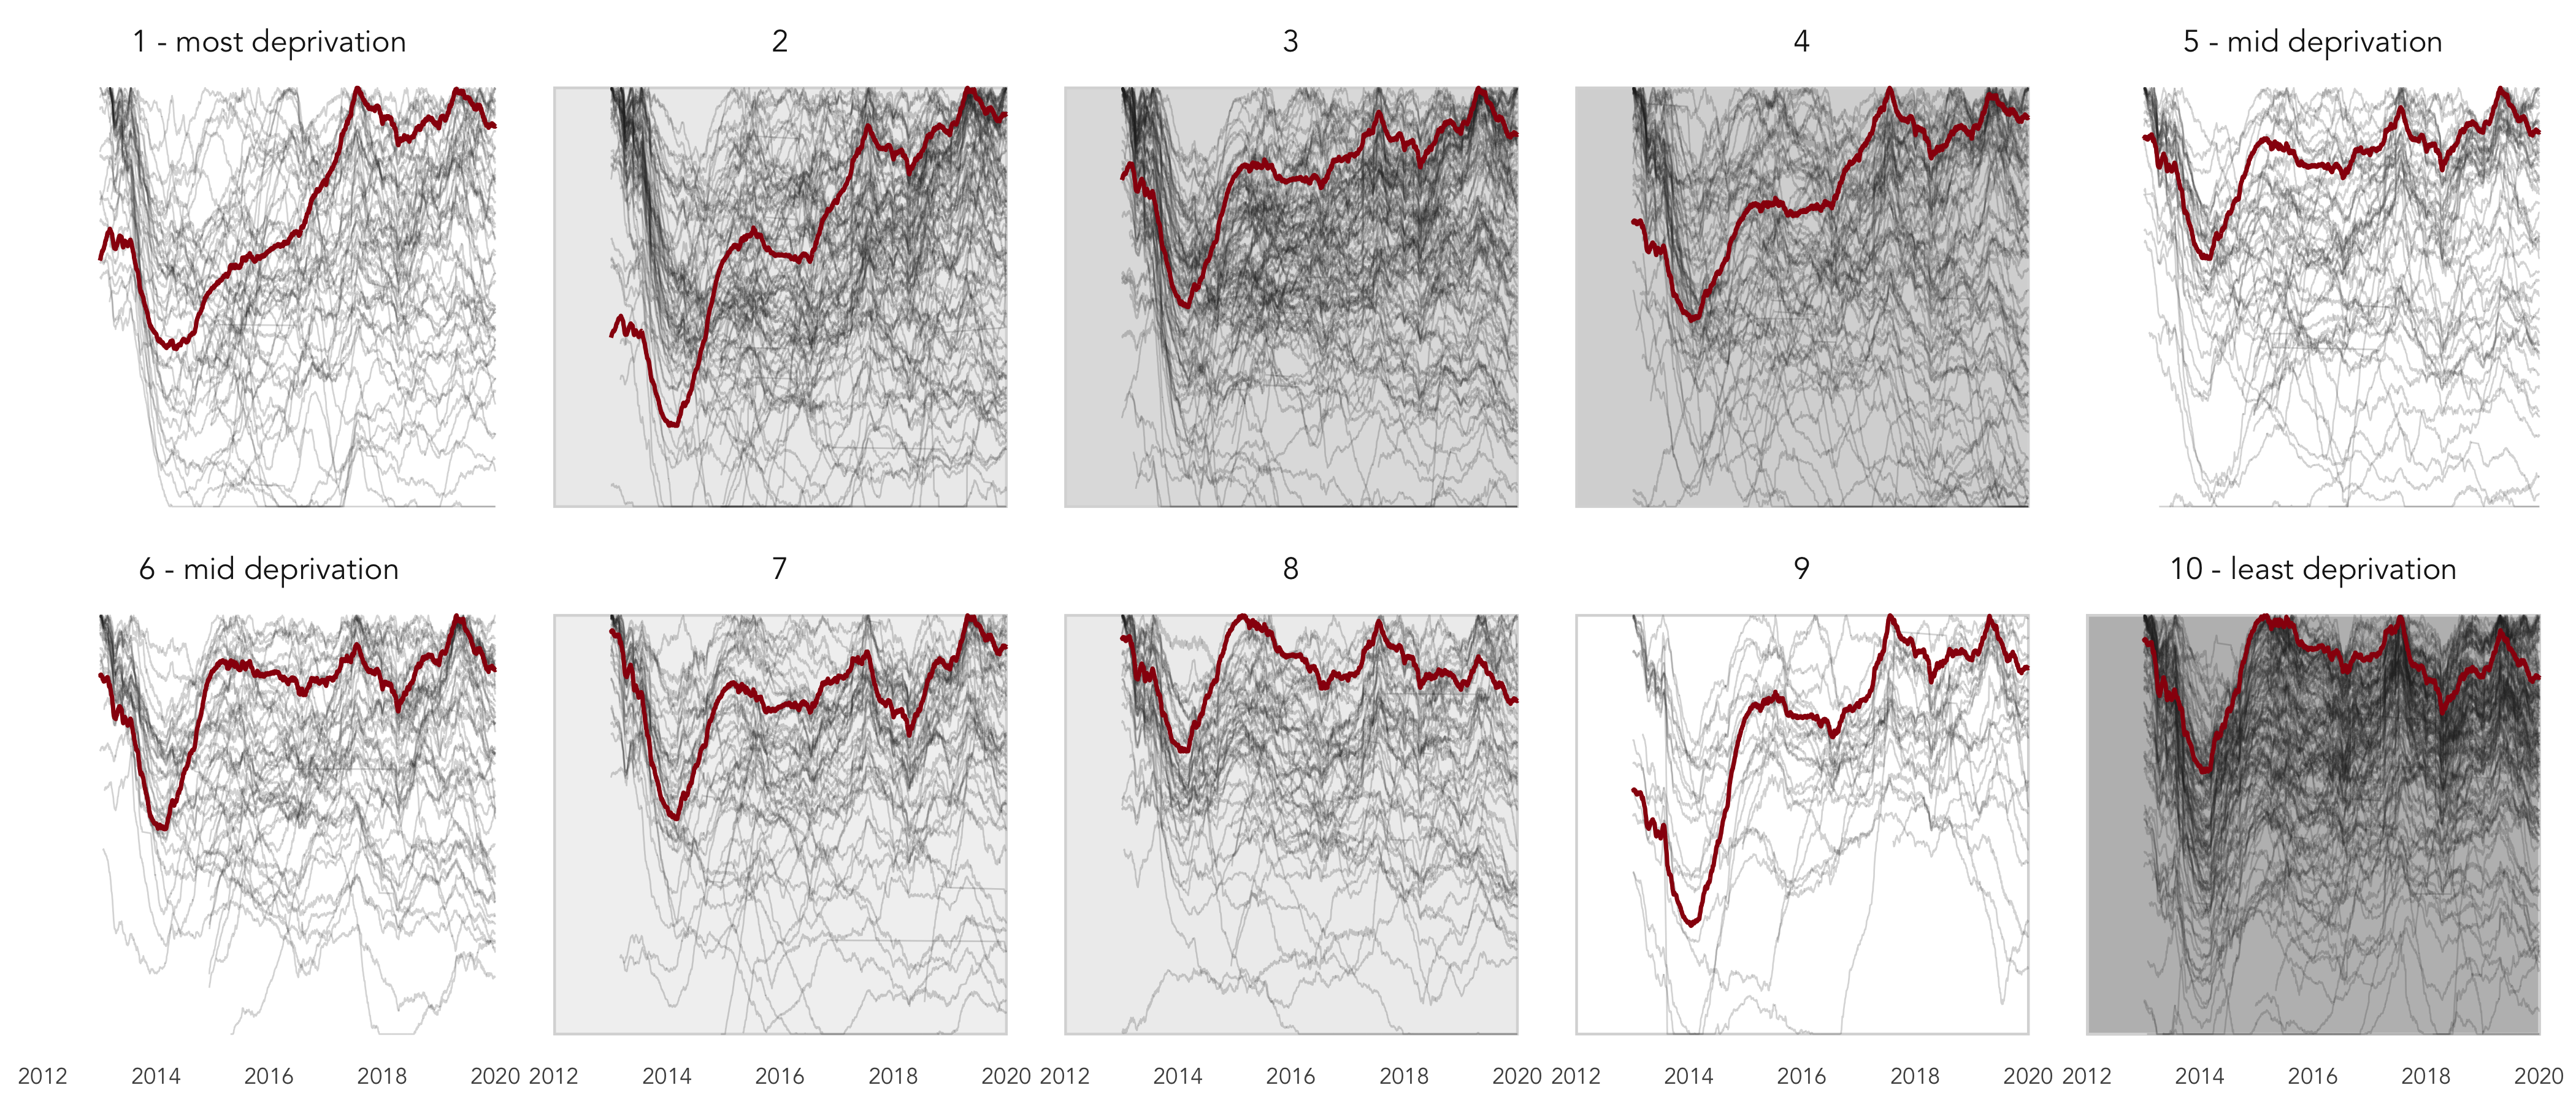 Rolling daily trip counts by income decile (red) and docking stations within income deciles (grey) for 2012-2019. Frequencies are locally scaled by income decile and docking station and with a 365-day smoothing. Docking stations are ordered within small multiples from lowest (1) to highest (10) income deciles. Grey fill within each decile plot varies according to overall trip counts originating from dockin stations in that decile